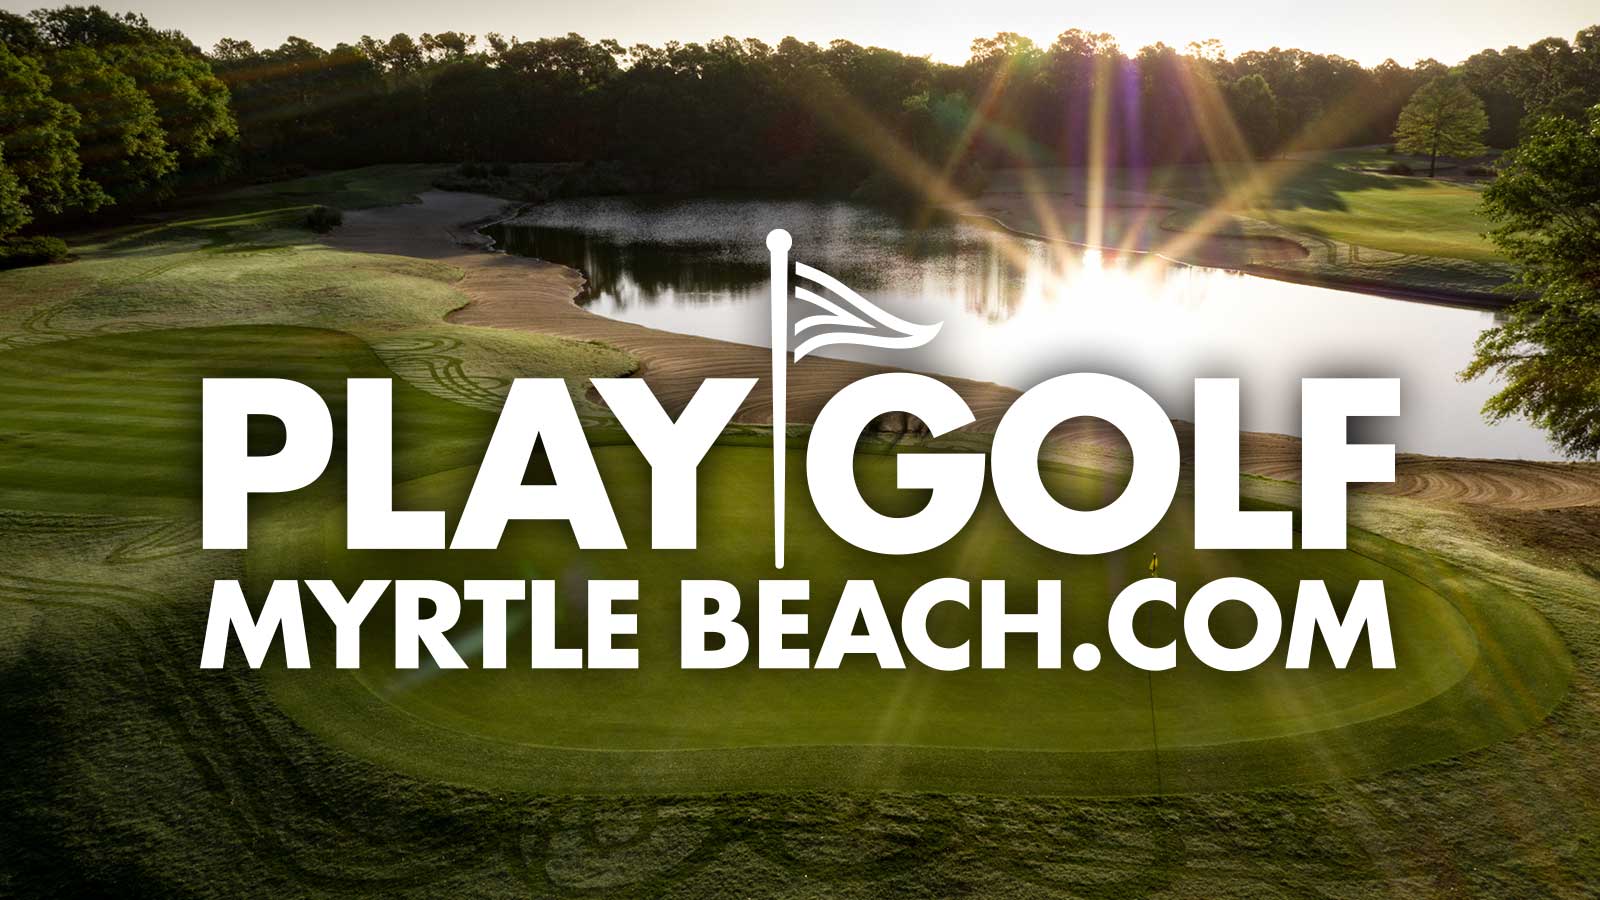 Myrtle Beach Wedding Packages on At The Cherry Grove Pier   Myrtle Beach Golf Packages   Golf Holiday